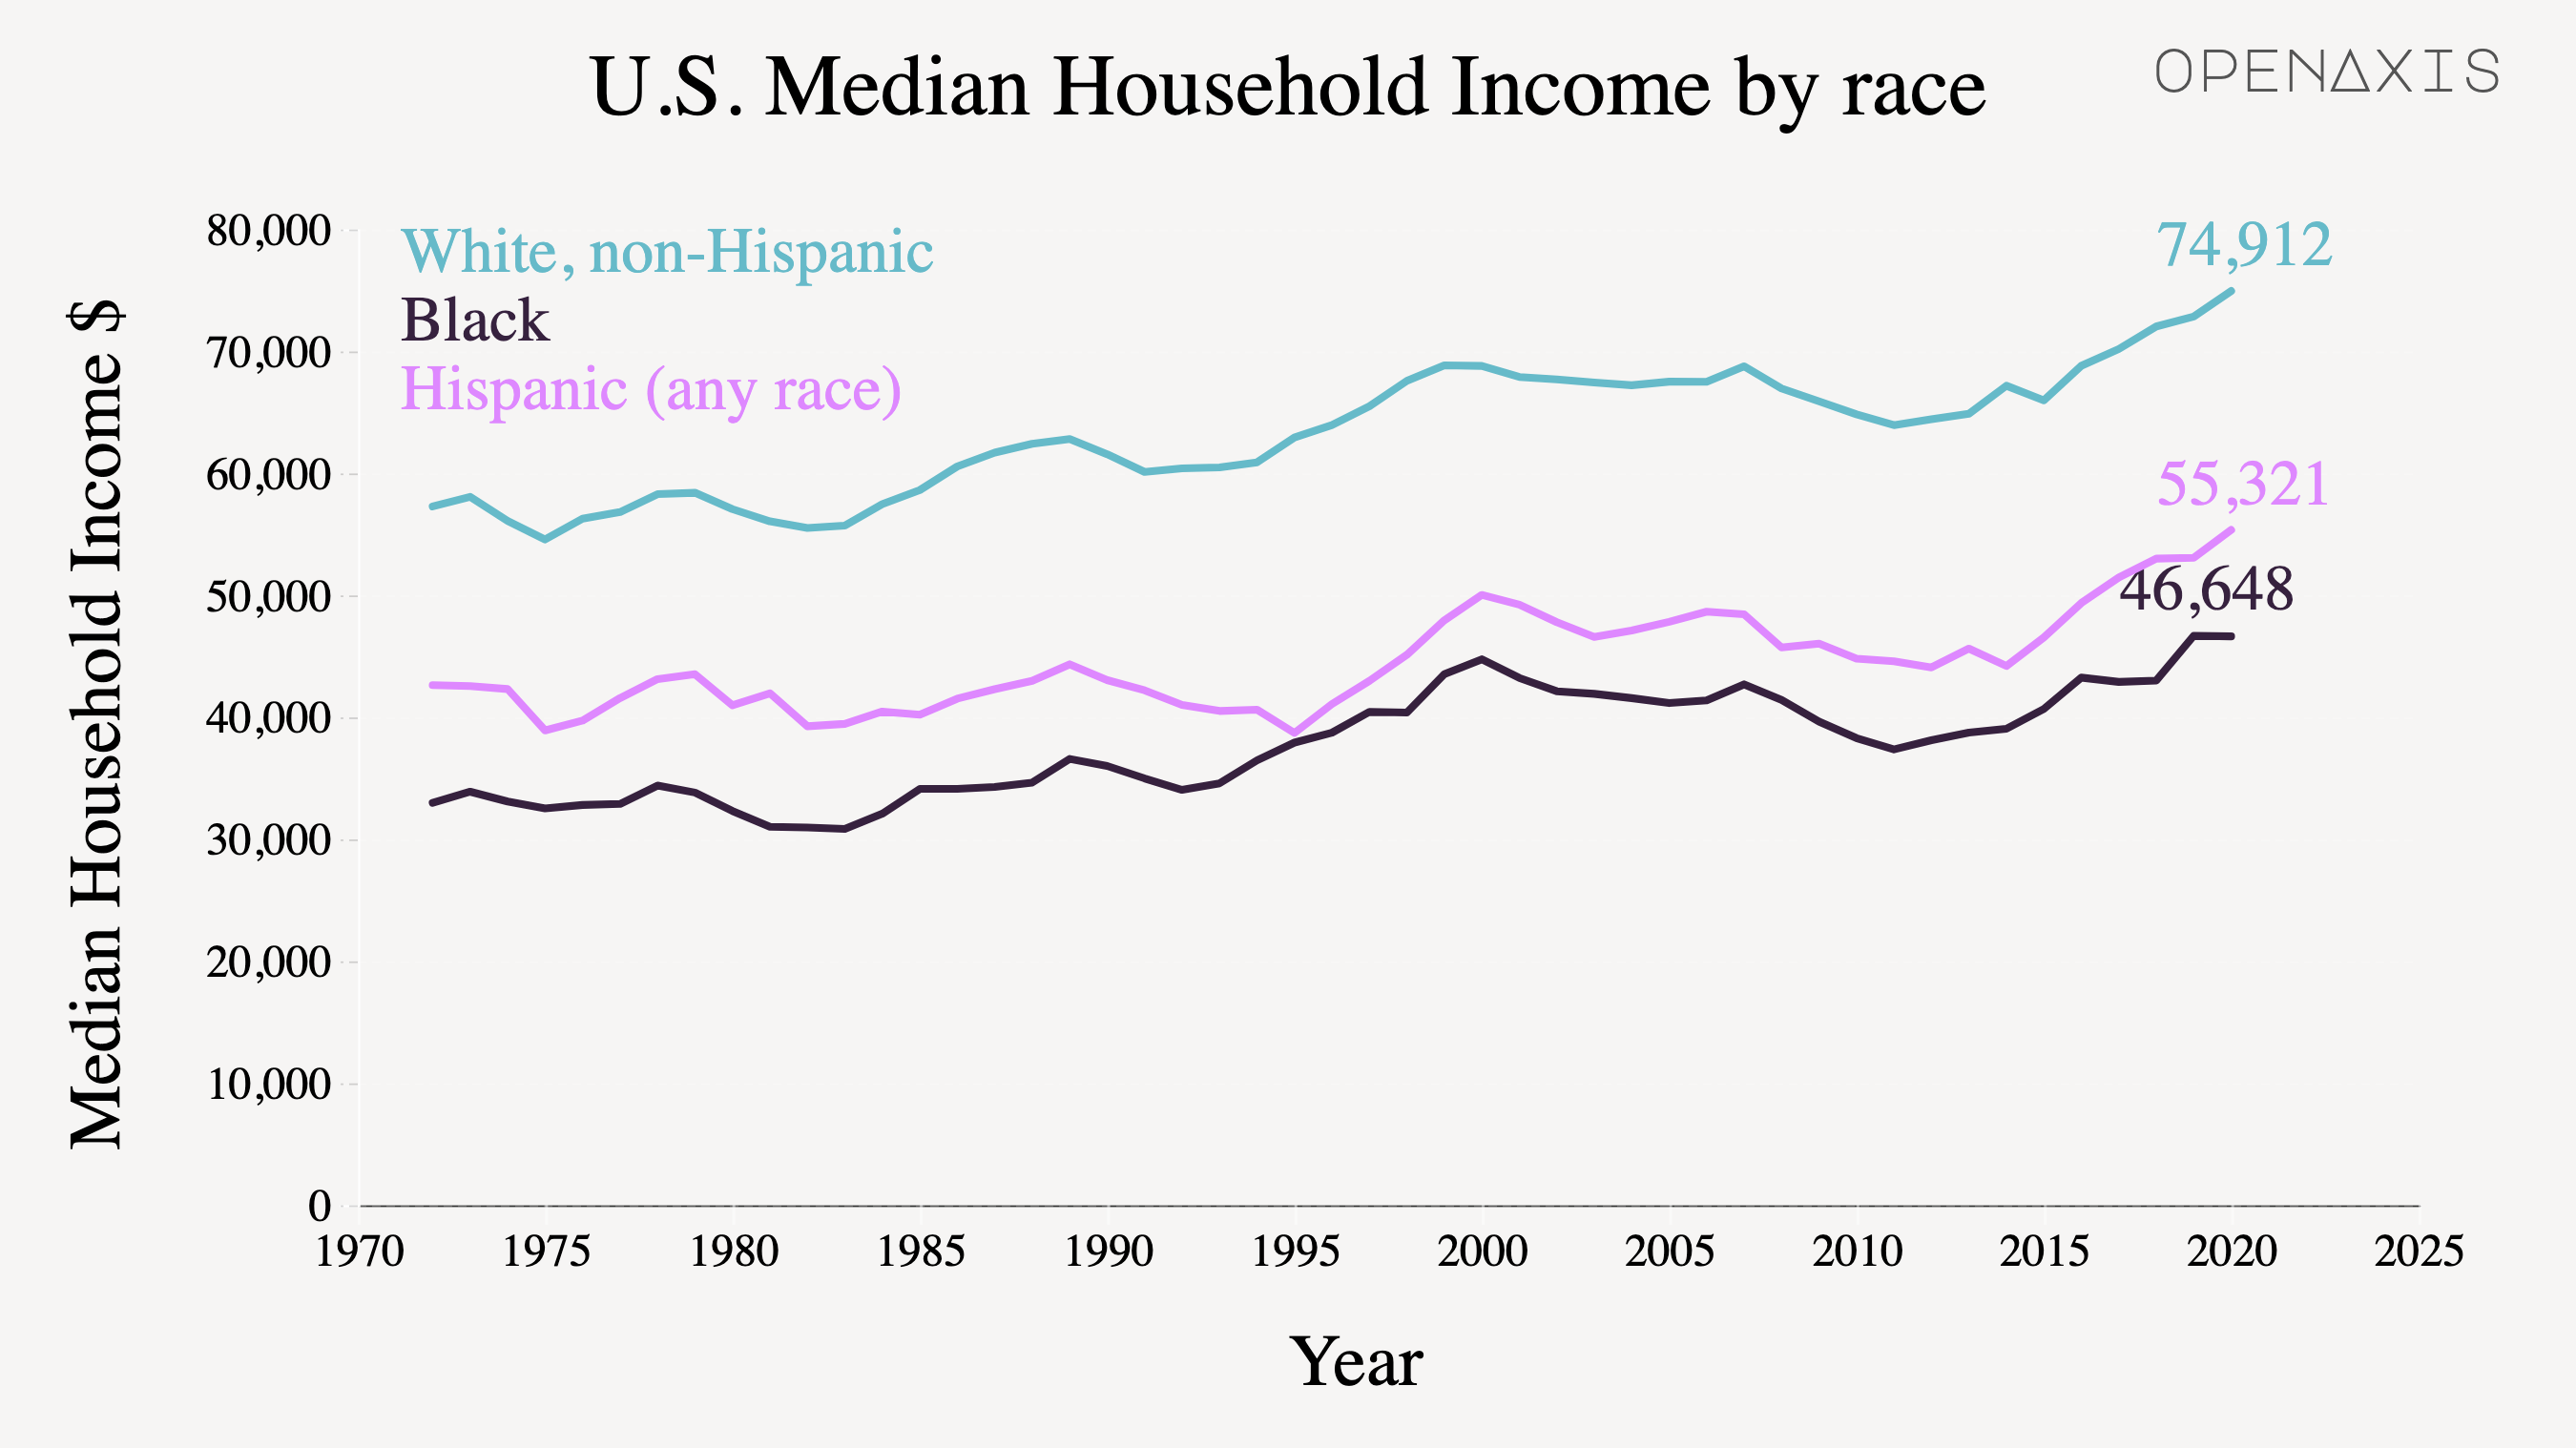 <p>In 2020, Black households had the lowest median household income of $45,870. In comparison, White households had a median household income of $74,912. </p><p><br /></p><p>Source: <a href="https://www.census.gov/library/publications/2021/demo/p60-273.html" target="_blank">U.S. Census Bureau, Current Population Survey, 1968 to 2021 Annual Social and Economic Supplements (CPS ASEC).</a></p>